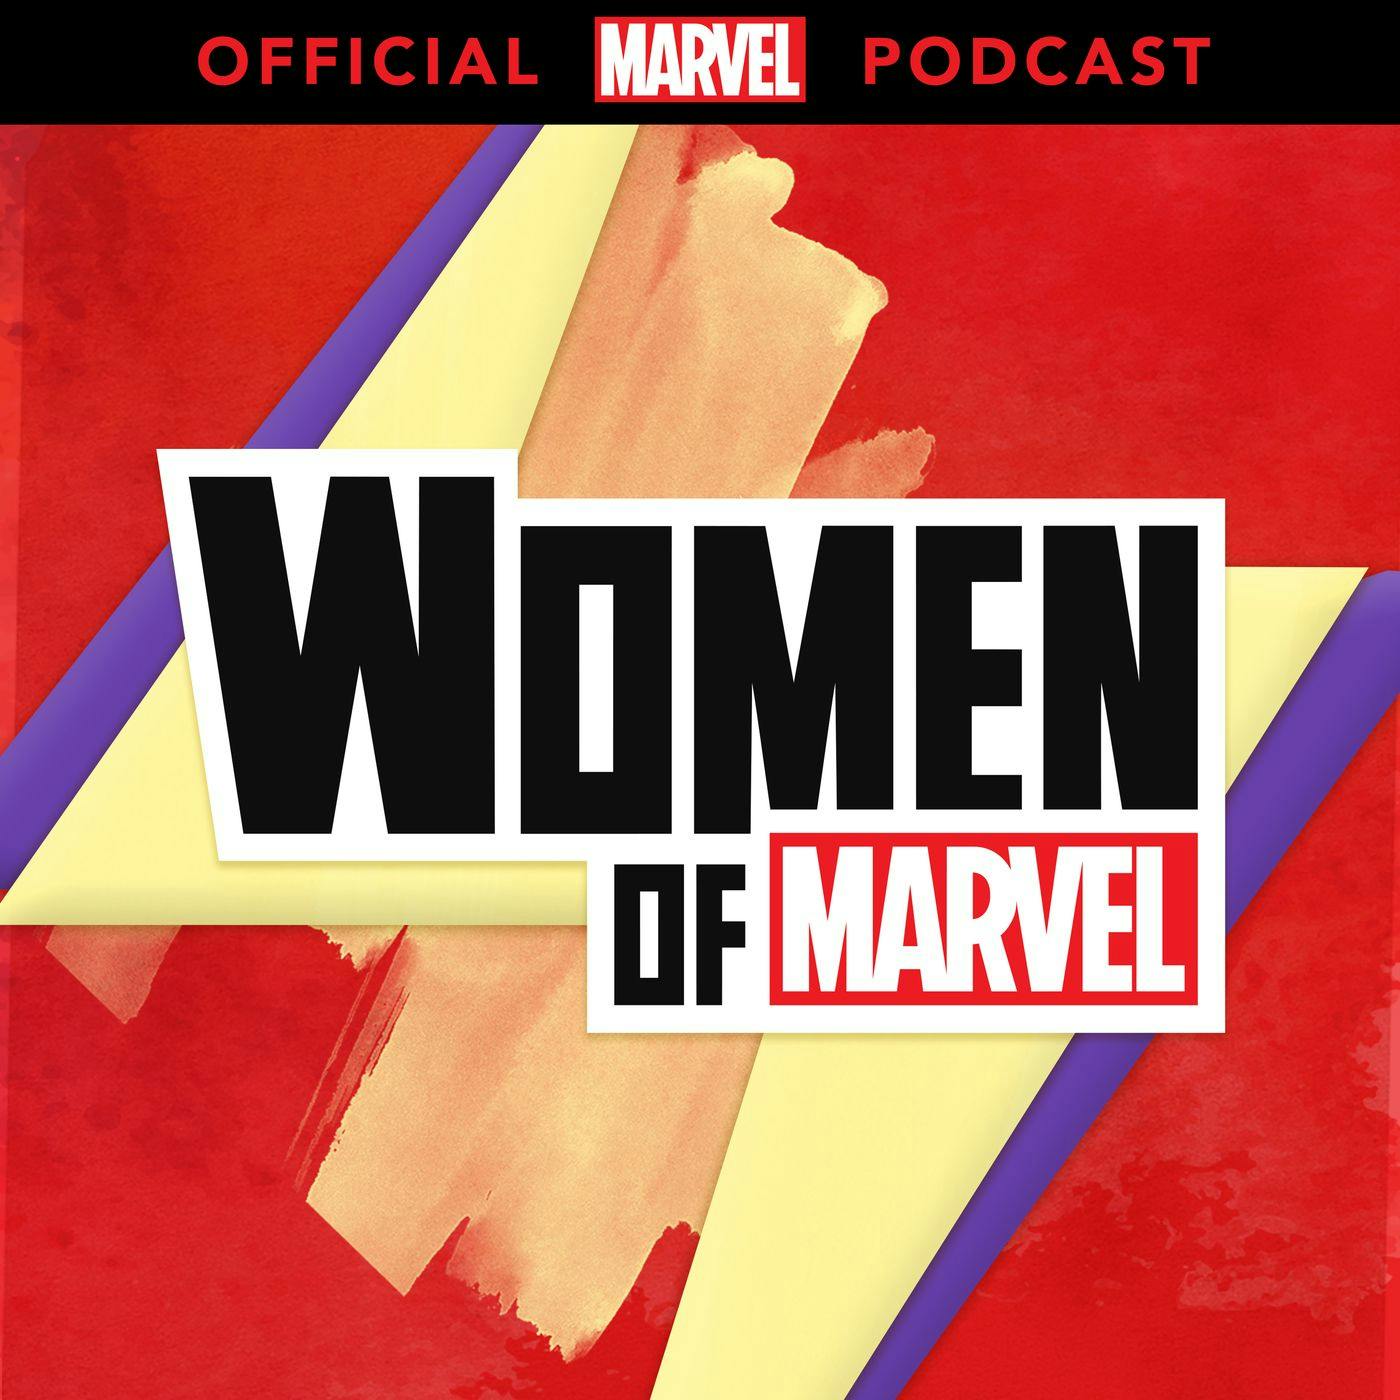 Ep 126 - Voices of Marvel with Yona Harvey